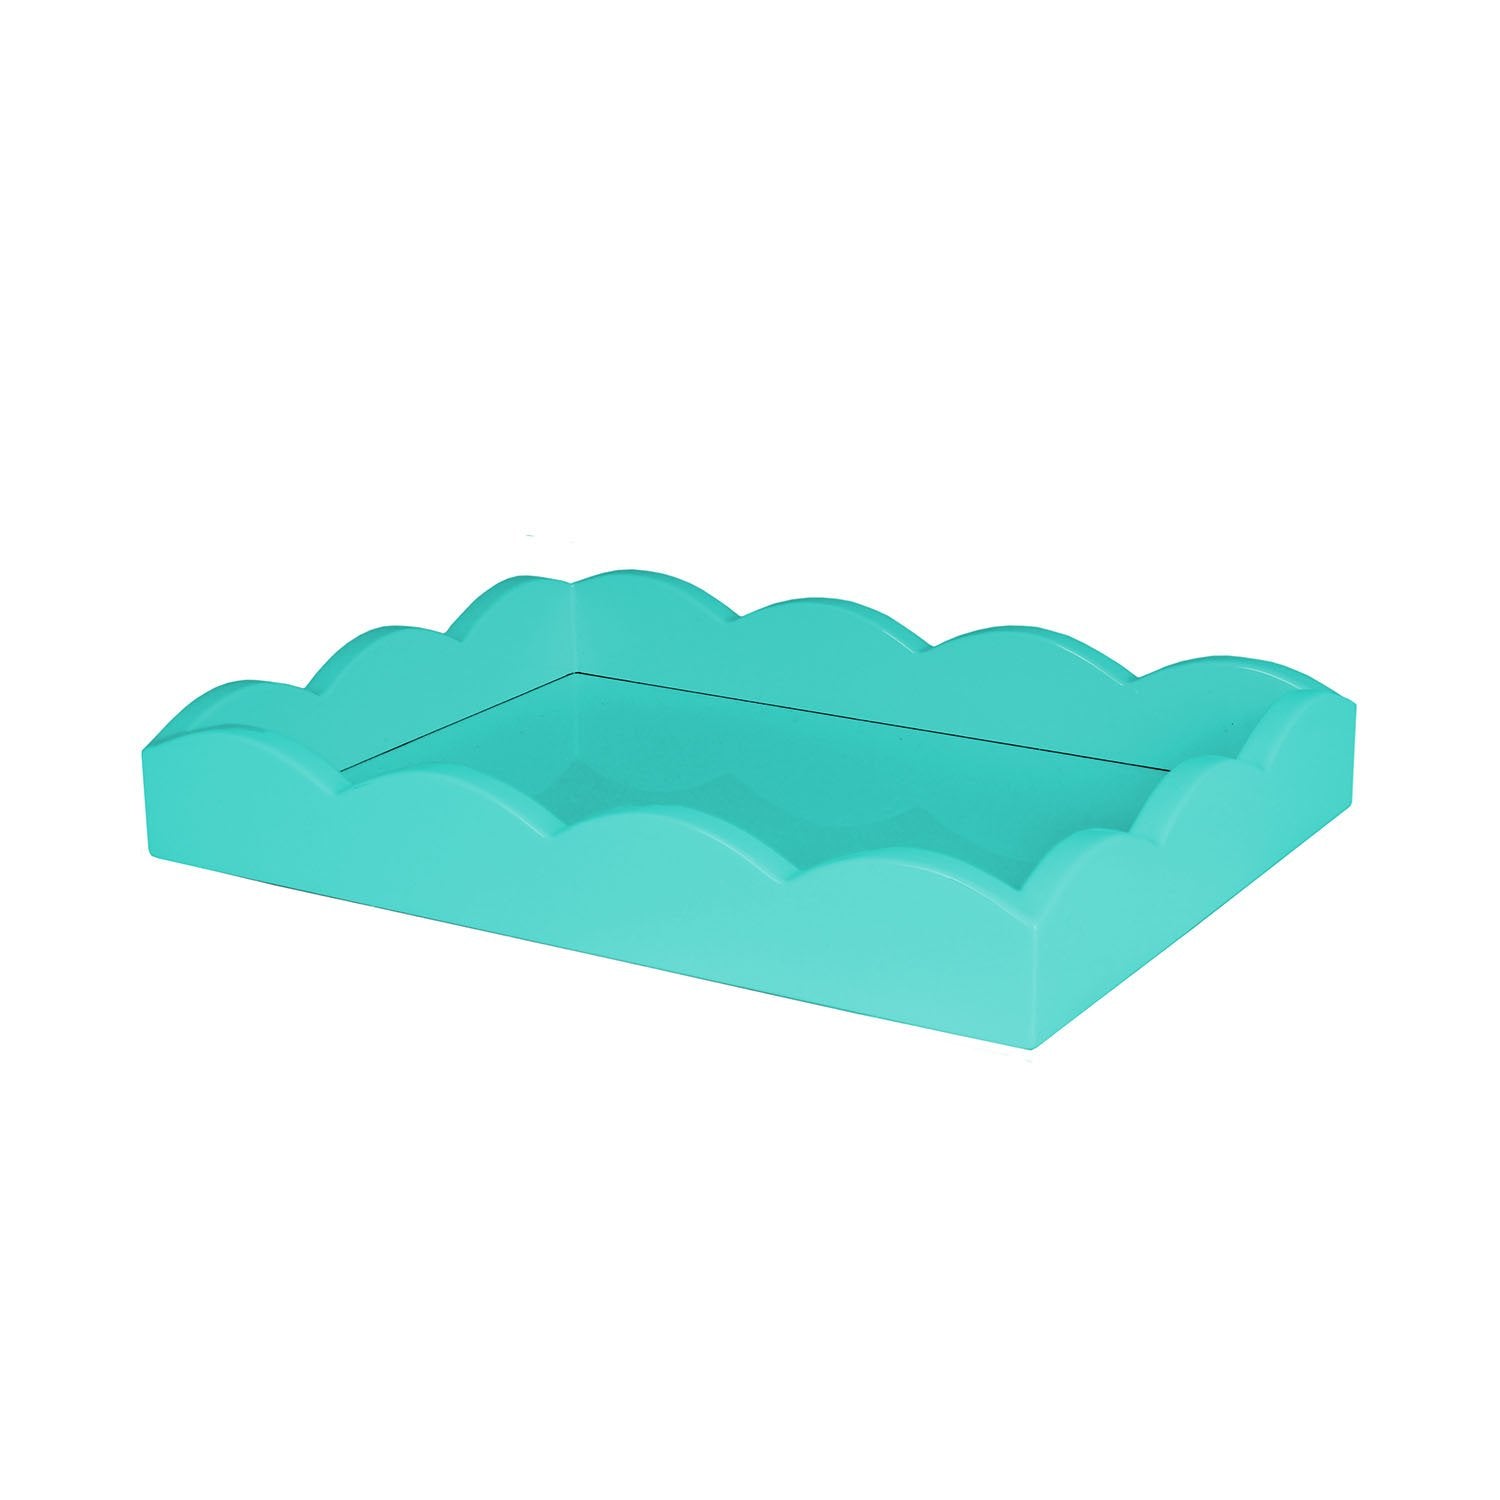 Turquoise Small Lacquered Scalloped Tray - Addison Ross Ltd UK